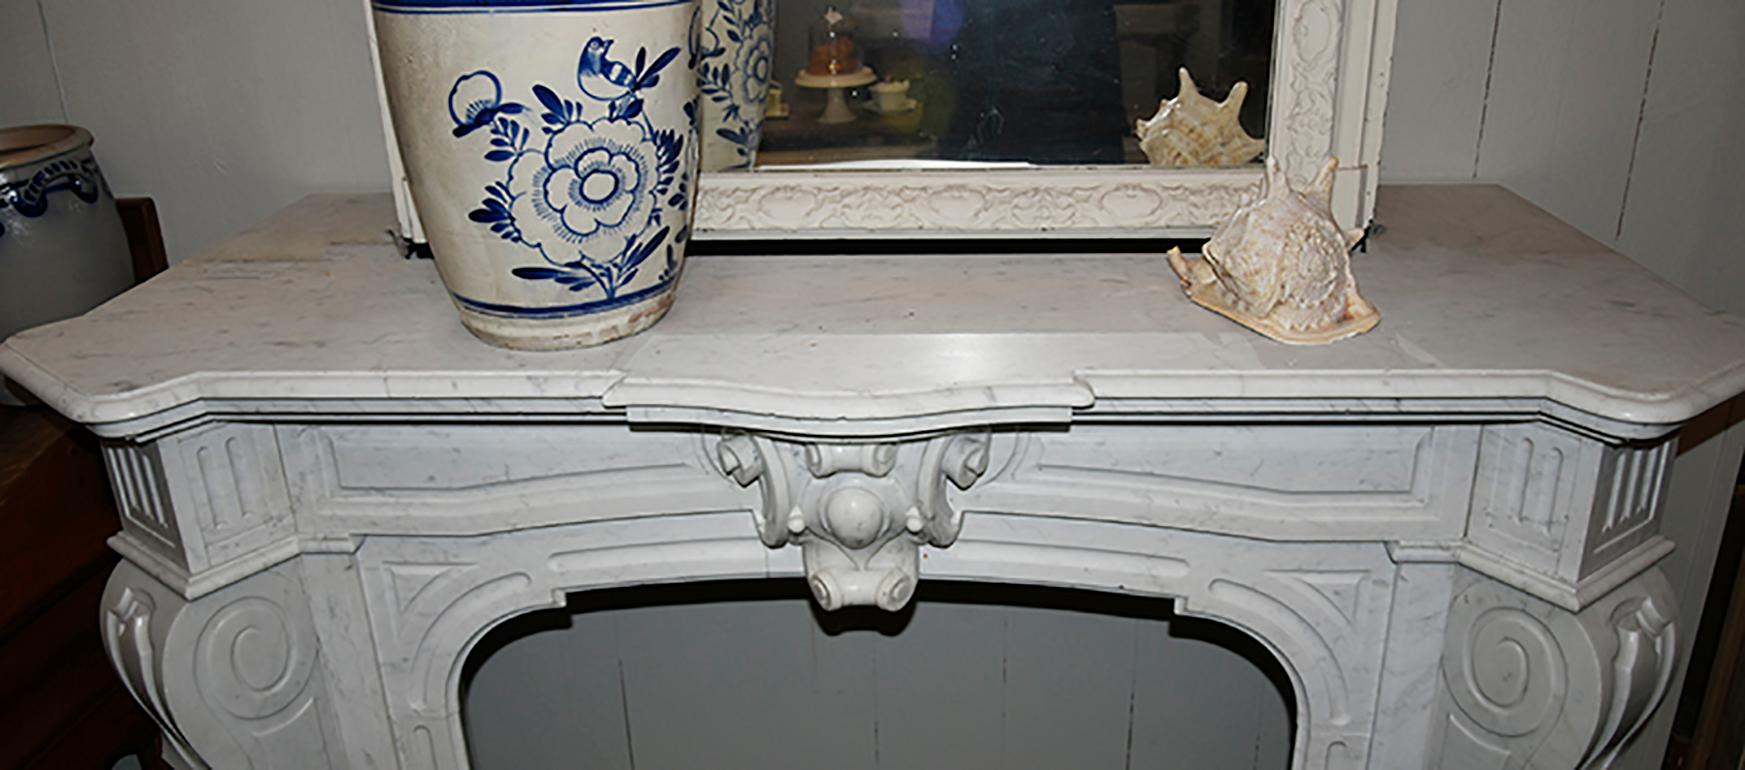 Carrara Marble Antique Marble Fireplace Mantel Piece from the 19th Century